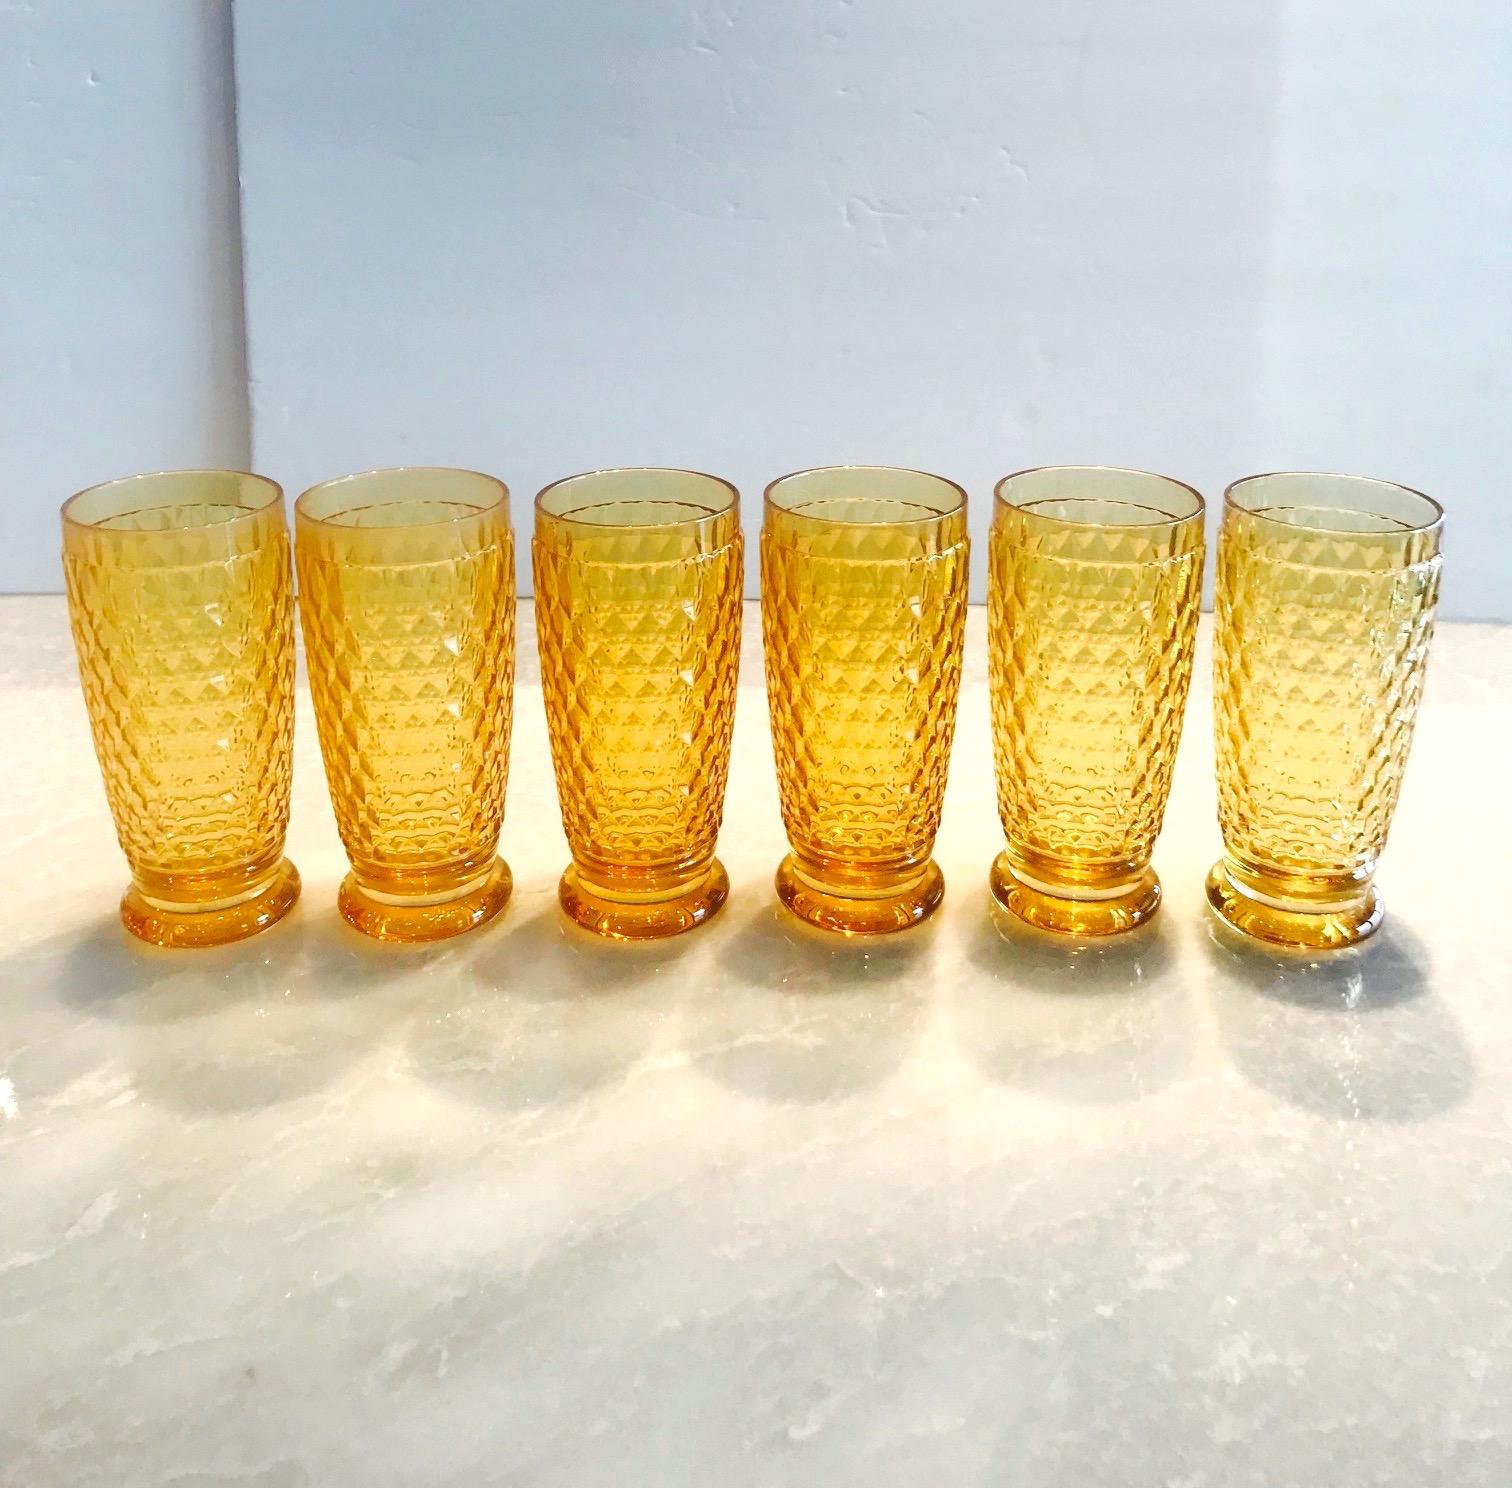 Set of seven luxury crystal highball barware glasses from Villeroy & Boch's Boston series. The glasses are comprised of hobnail crystal with Classic diamond patterns and smooth rounded bases. In gorgeous amber colored crystal, making them a unique